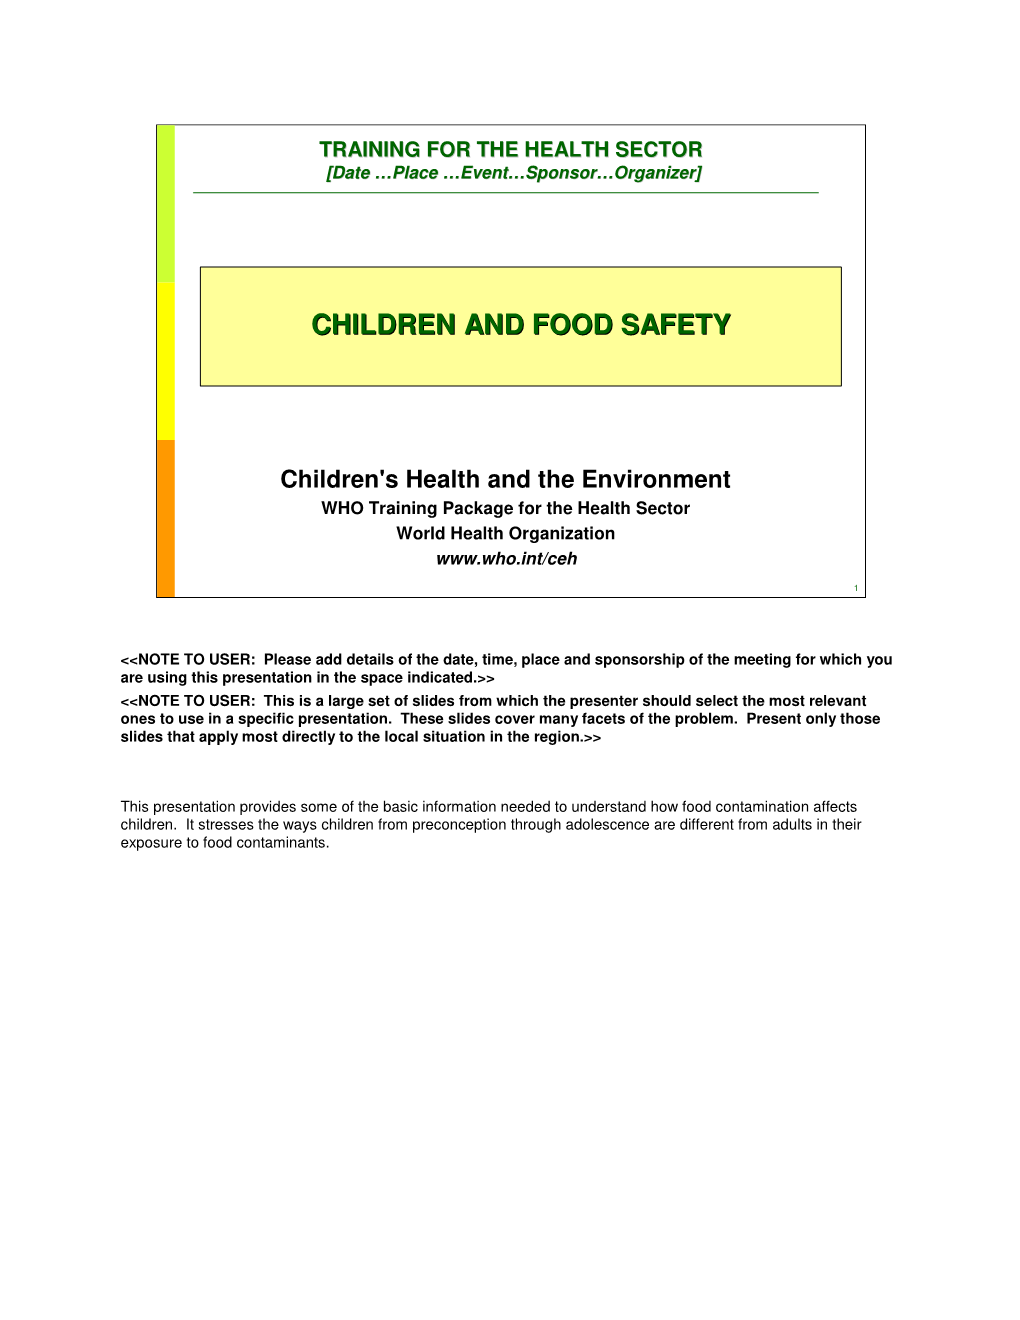 Children and Food Safety